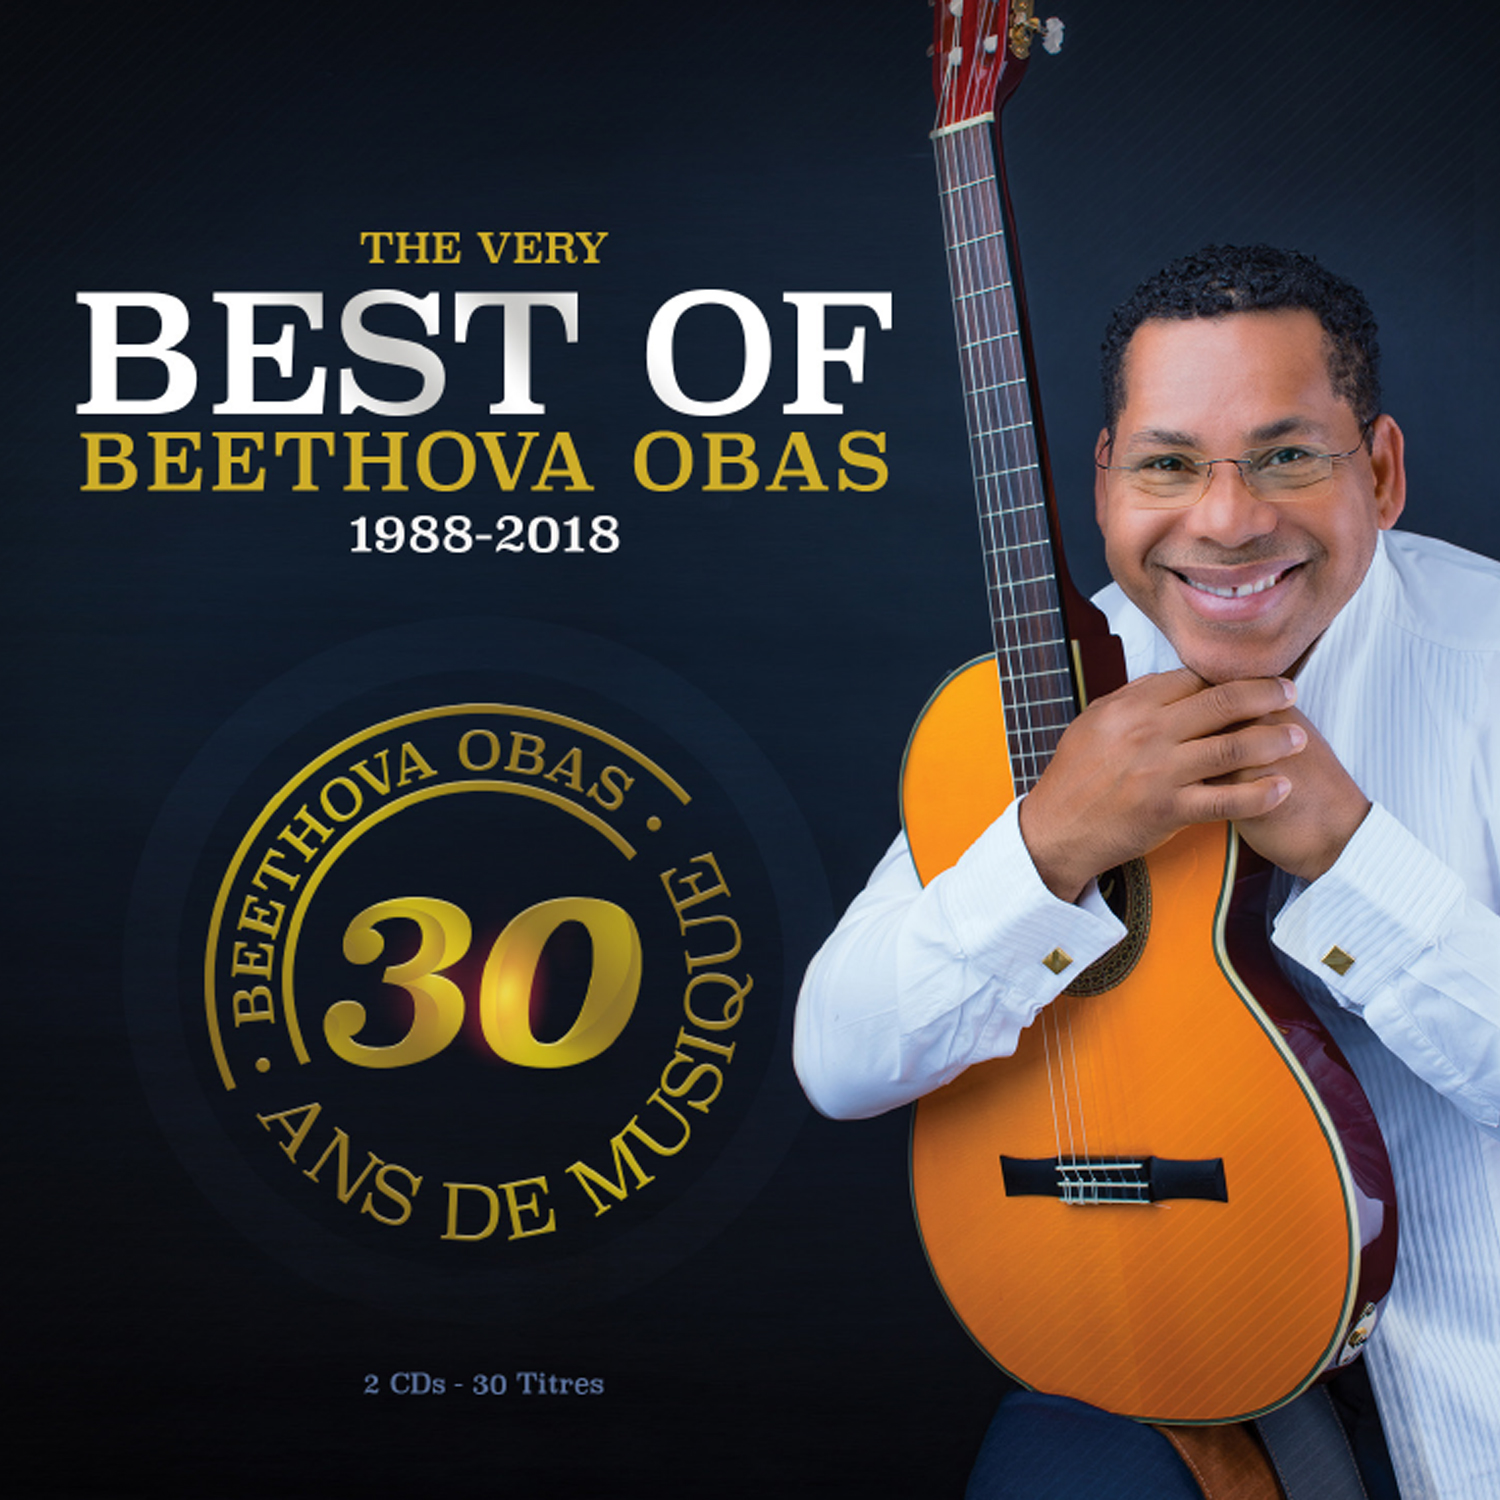 Beethova Obas - The very best of Beethova Obas album cover